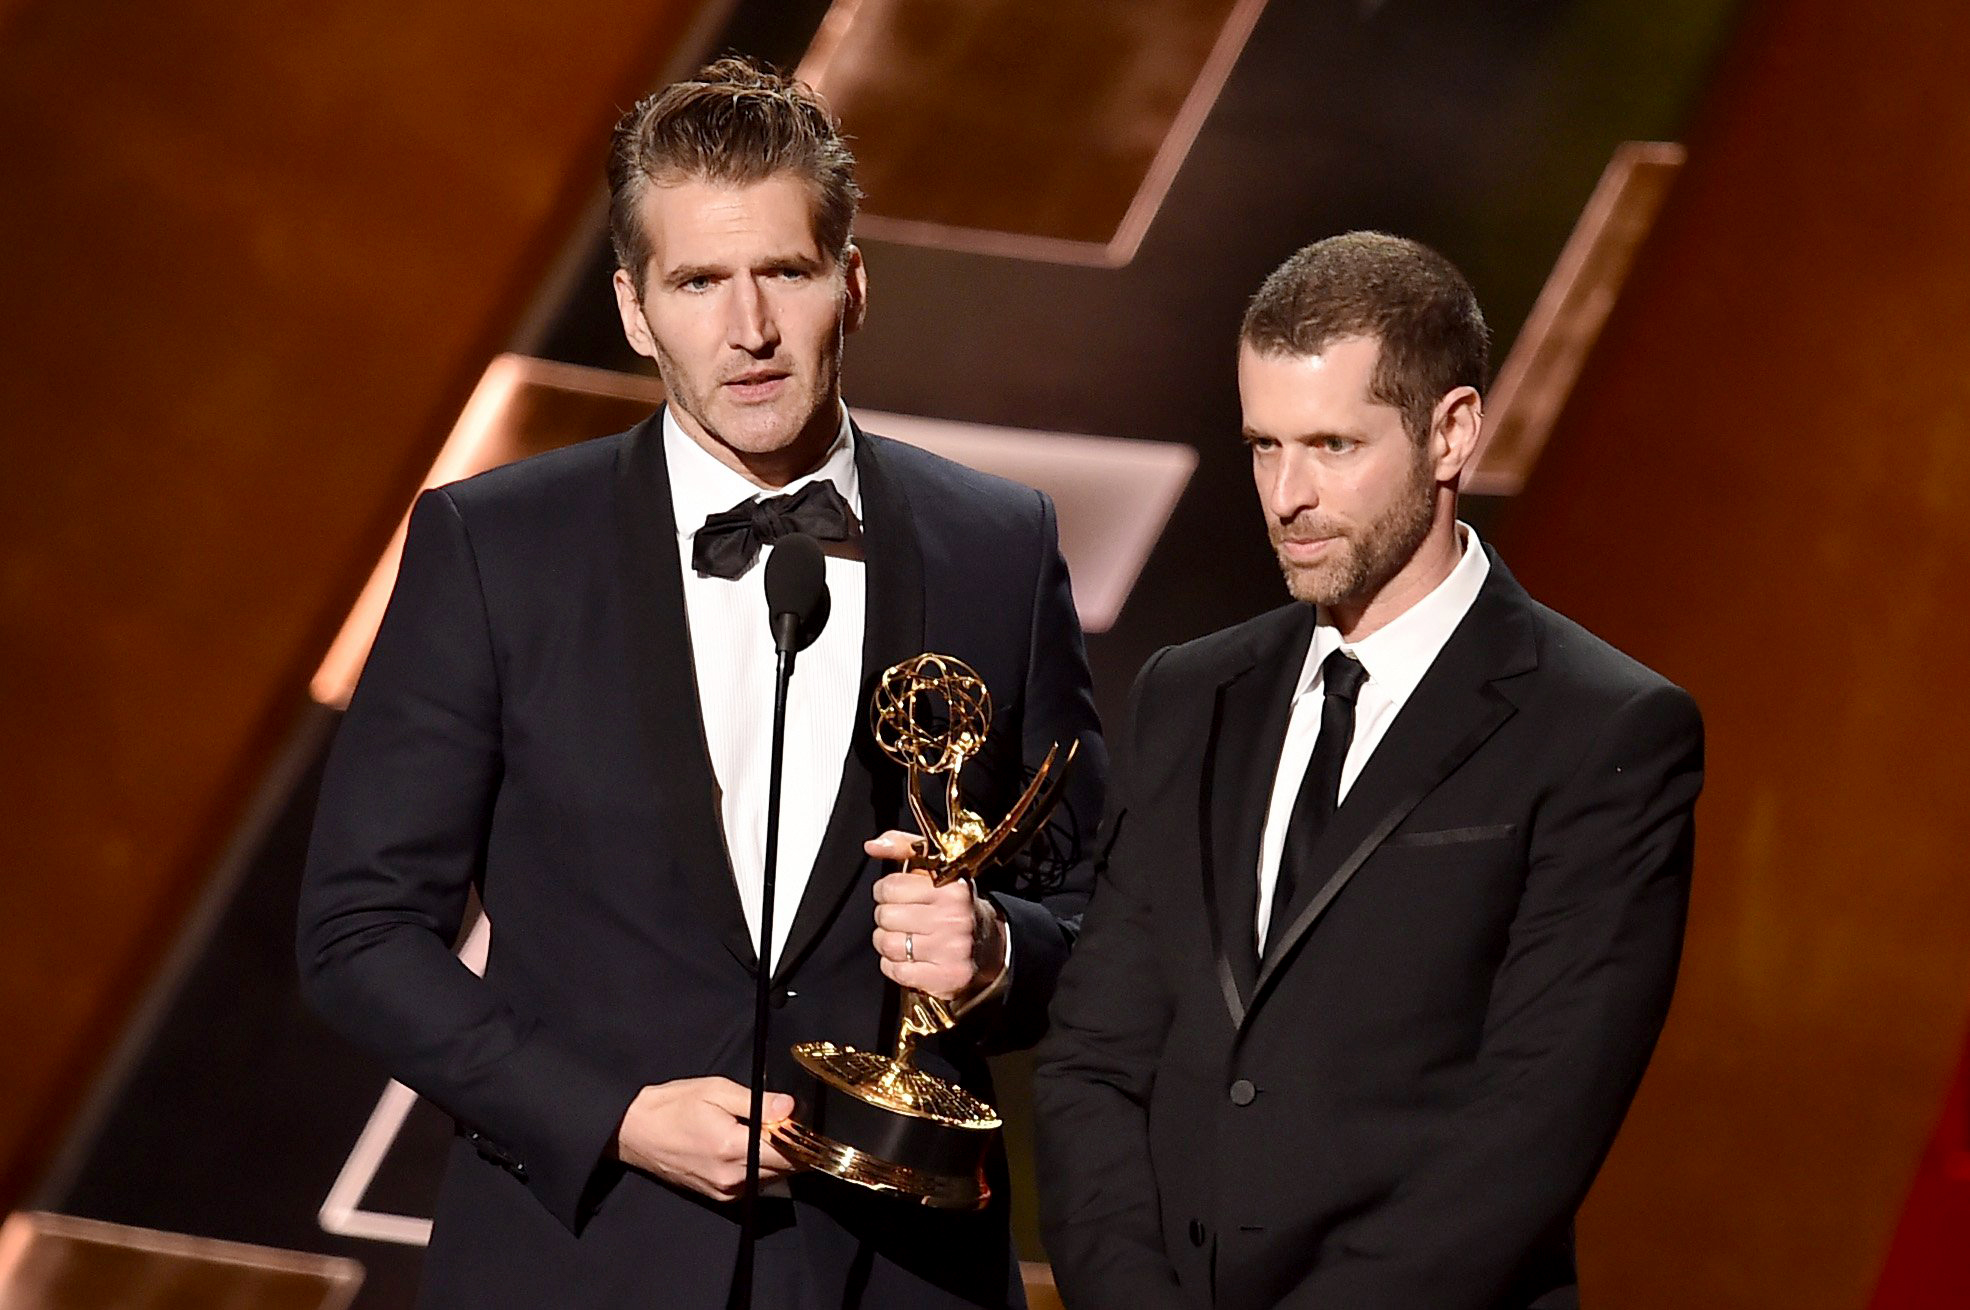 Image: 67th Annual Primetime Emmy Awards - Show